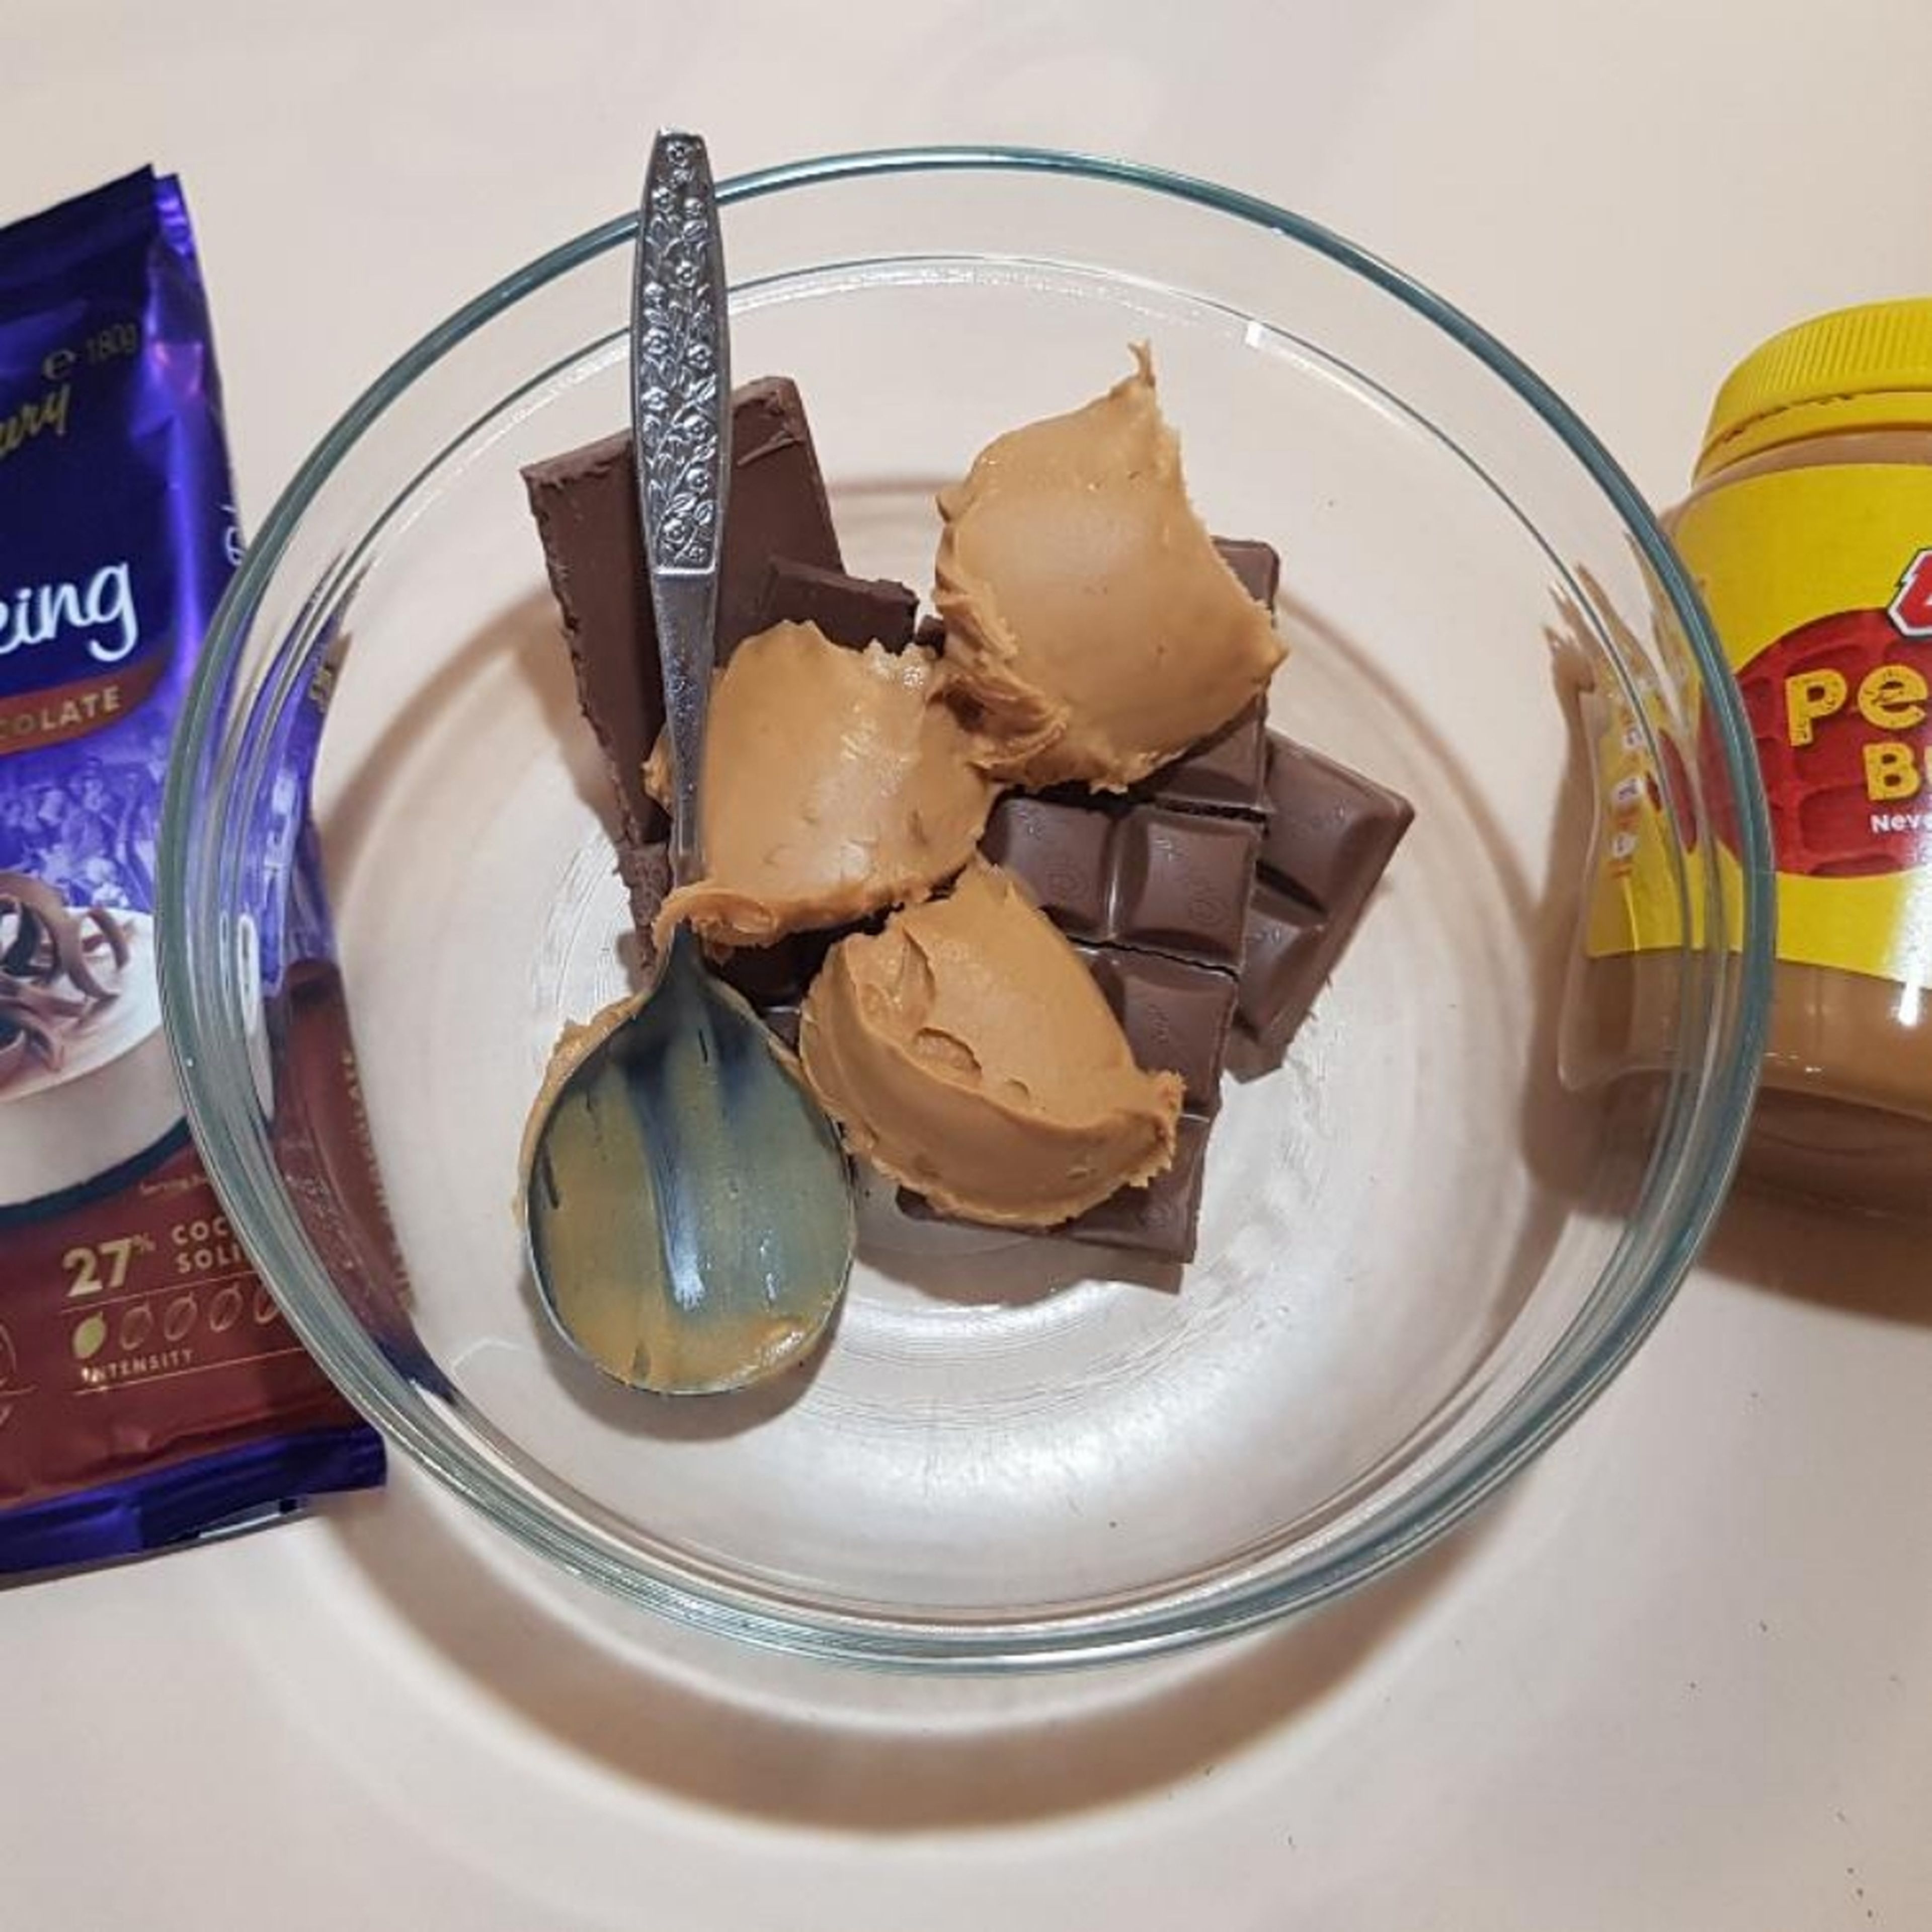 Melt chocolate & peanut butter together in the microwave in a microwave proof bowl. Do it slowly so you don't burn the chocolate. Check approximately every 20 seconds. See if your microwave has a "melt" setting.